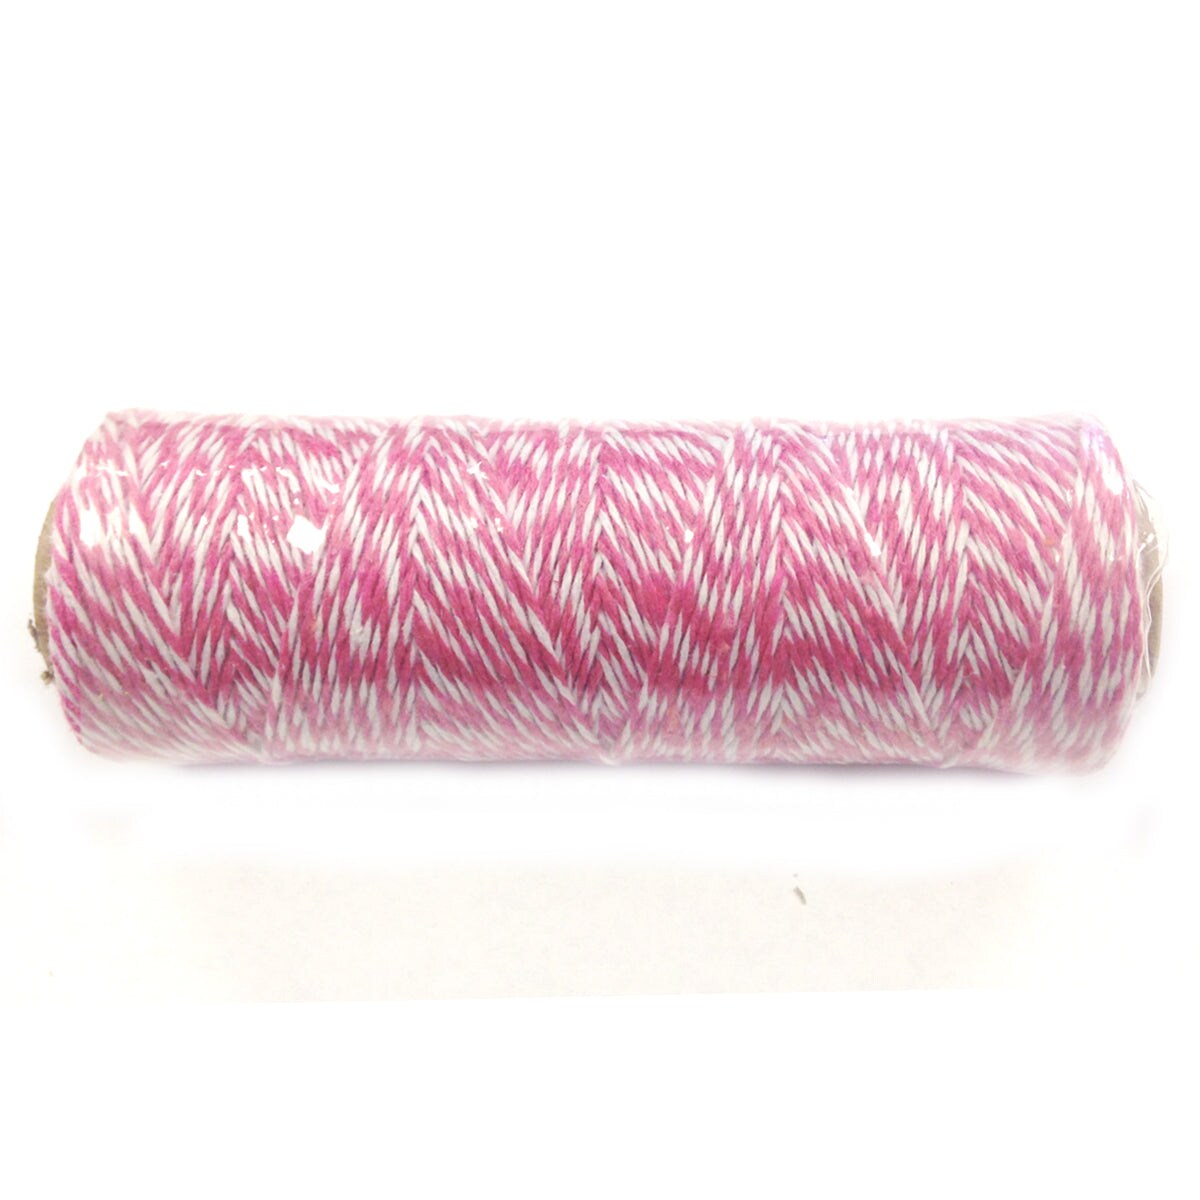 Pink Cotton String, Pink Cotton Twine, Bakers Twine, Gift Wrapping